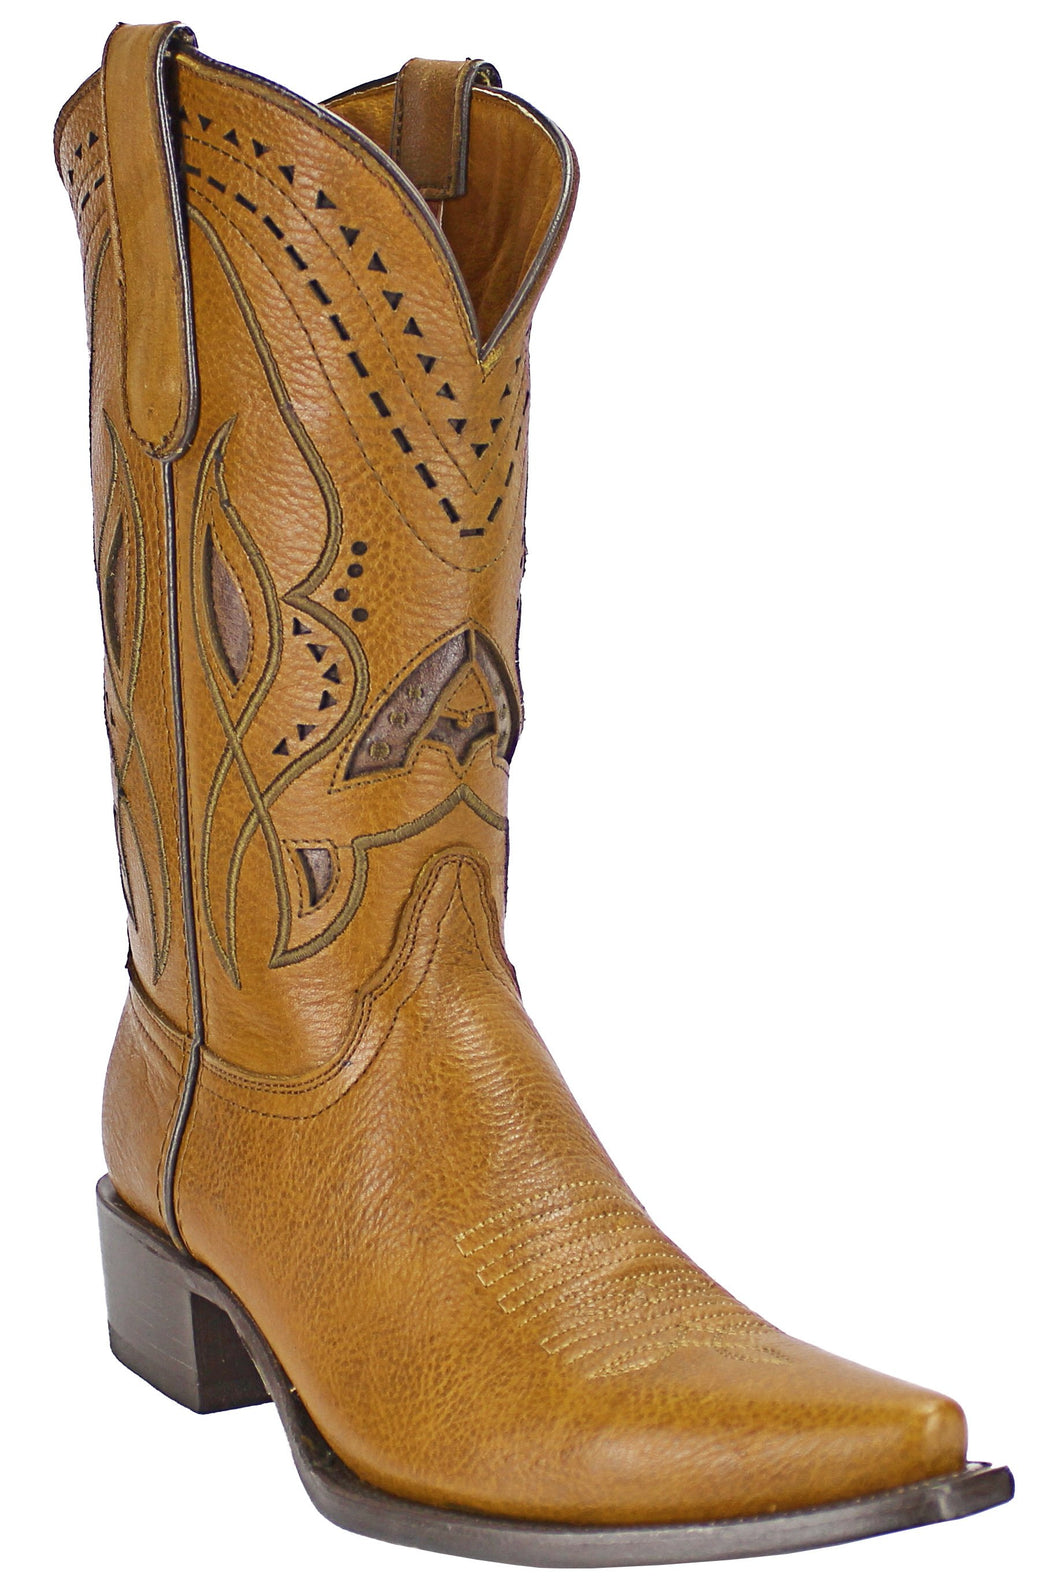 Admirable® Grizzly Leather Snip-Toe Boots (Honey)